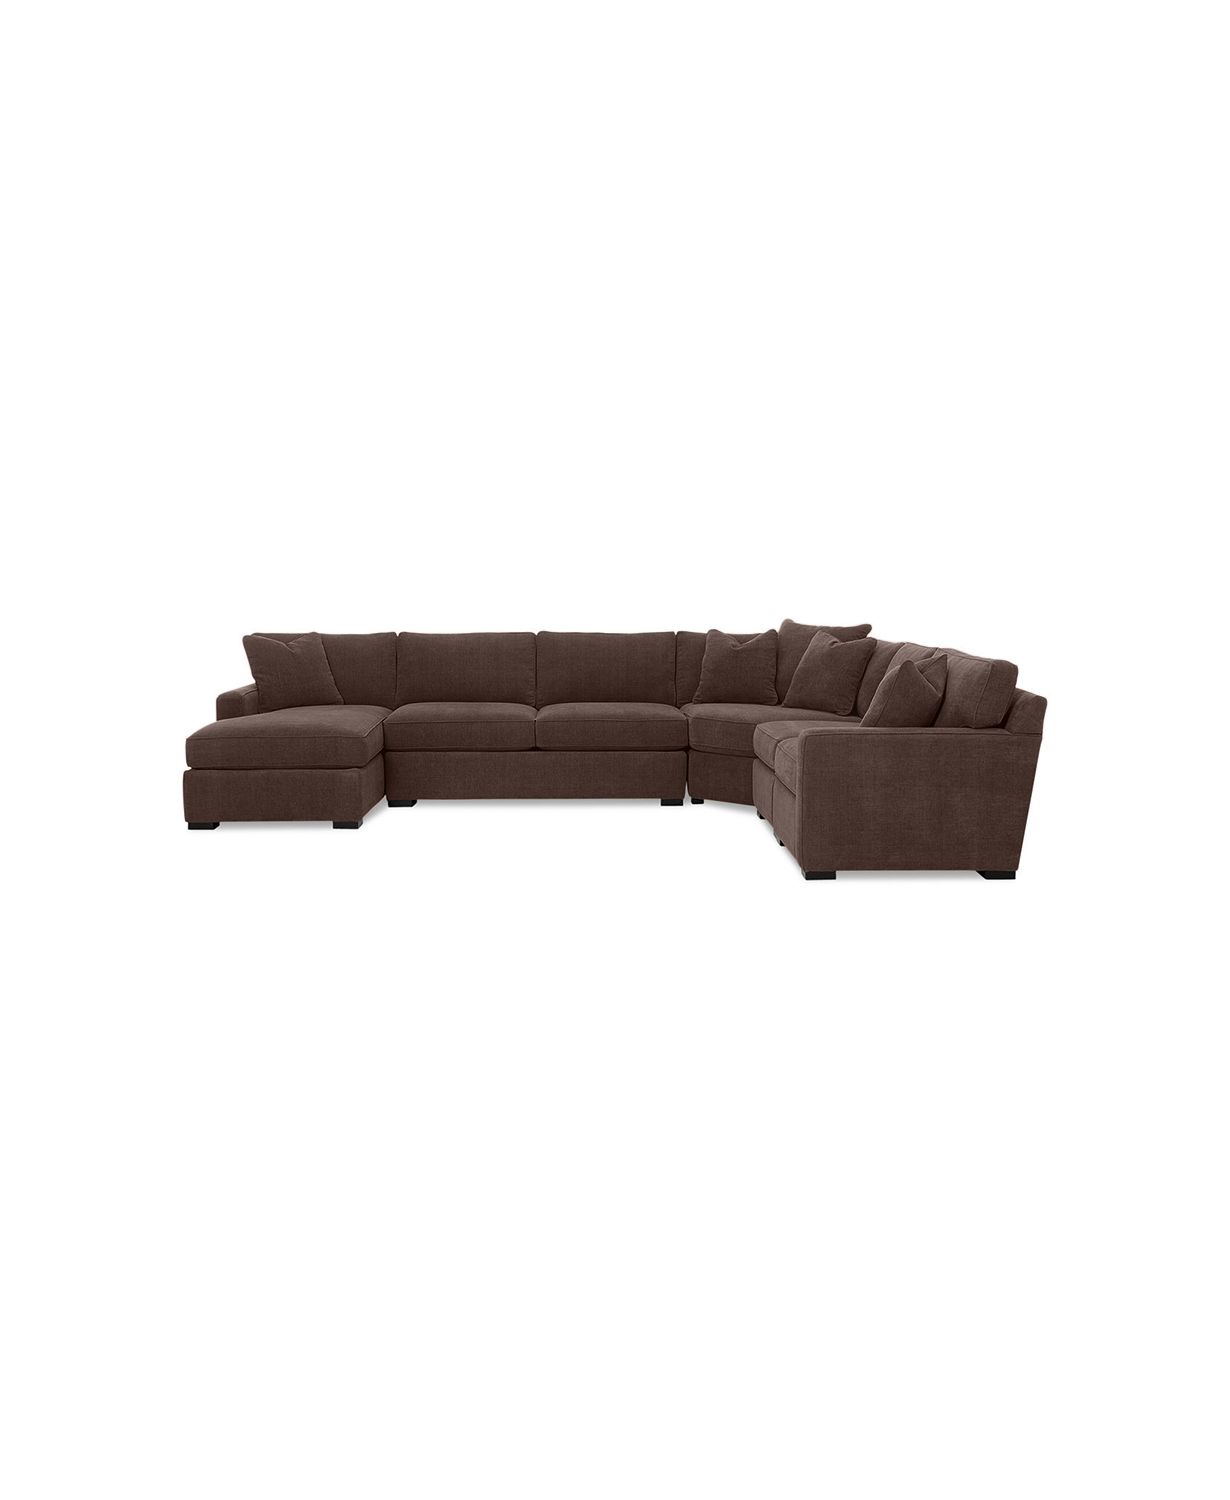 Radley 5 Piece Fabric Chaise Sectional